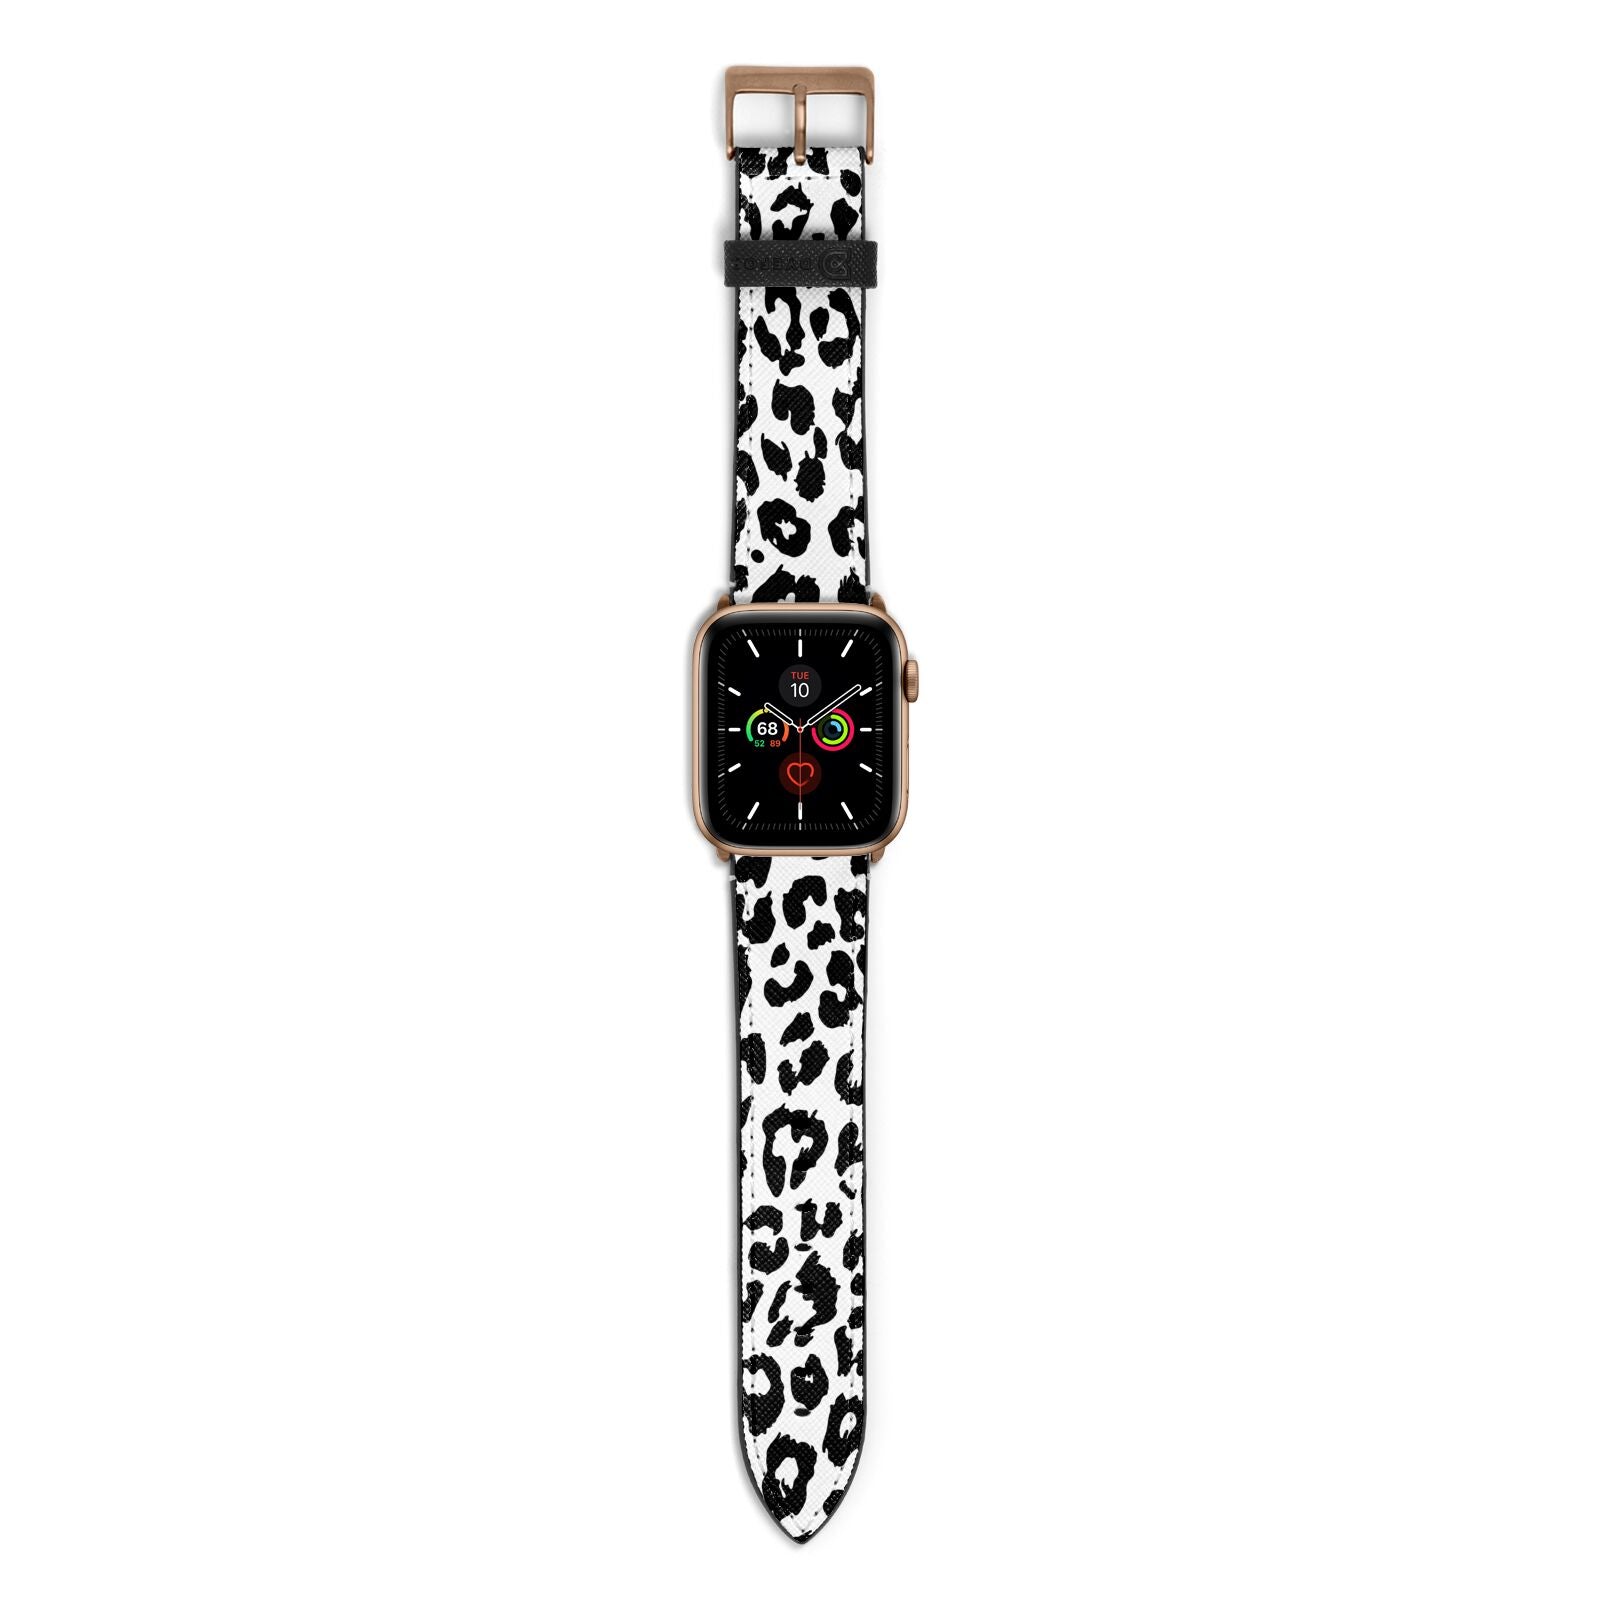 Black Leopard Print Apple Watch Strap with Gold Hardware